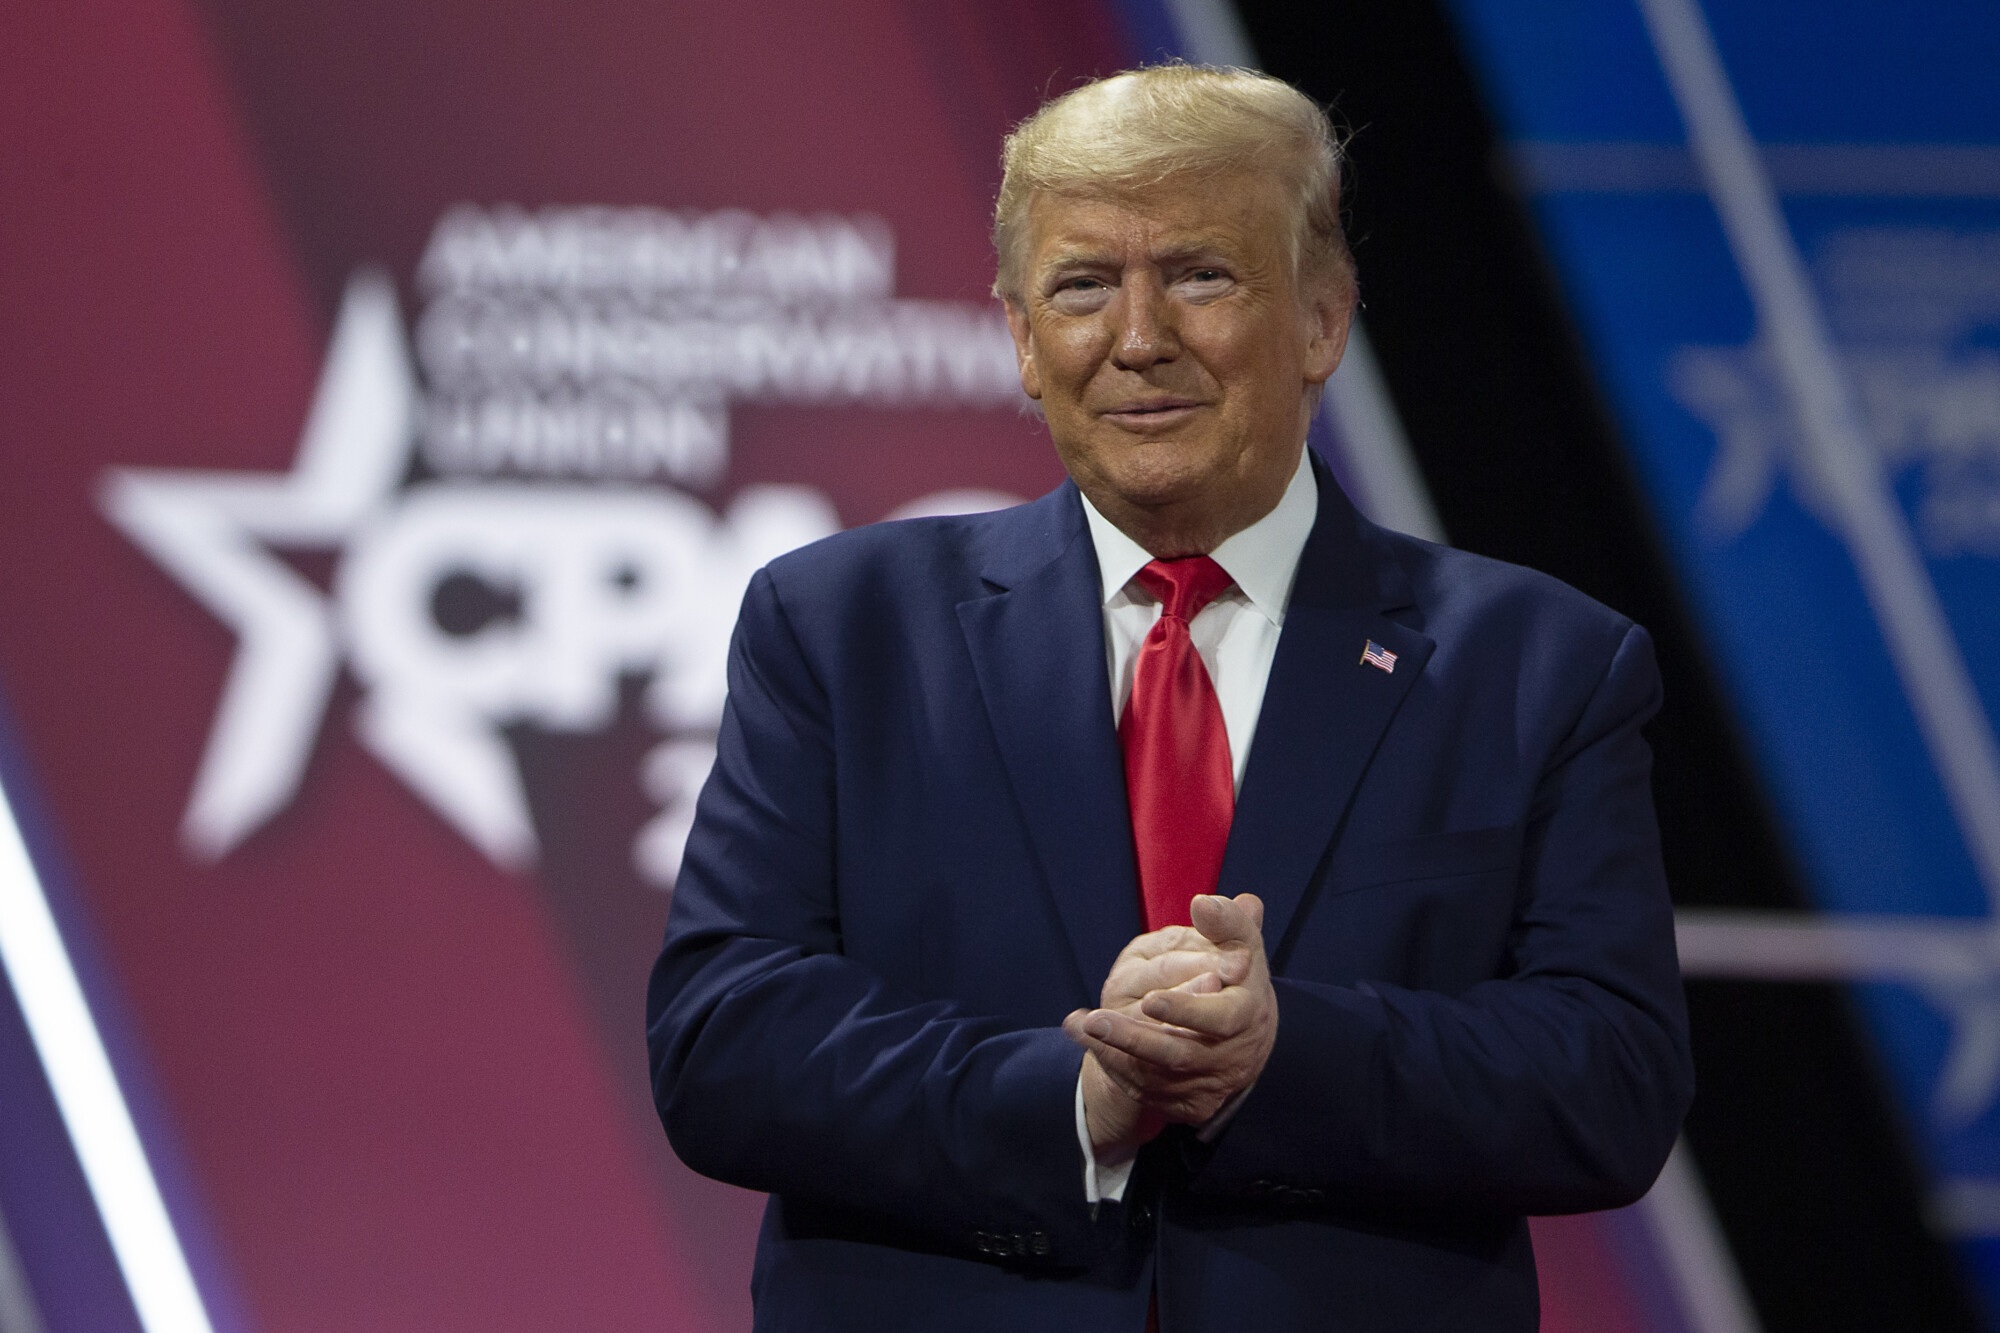 Trump’s CPAC Speech to Focus on Countering China, Dismantling Big Tech Monopoly, Reopening Schools